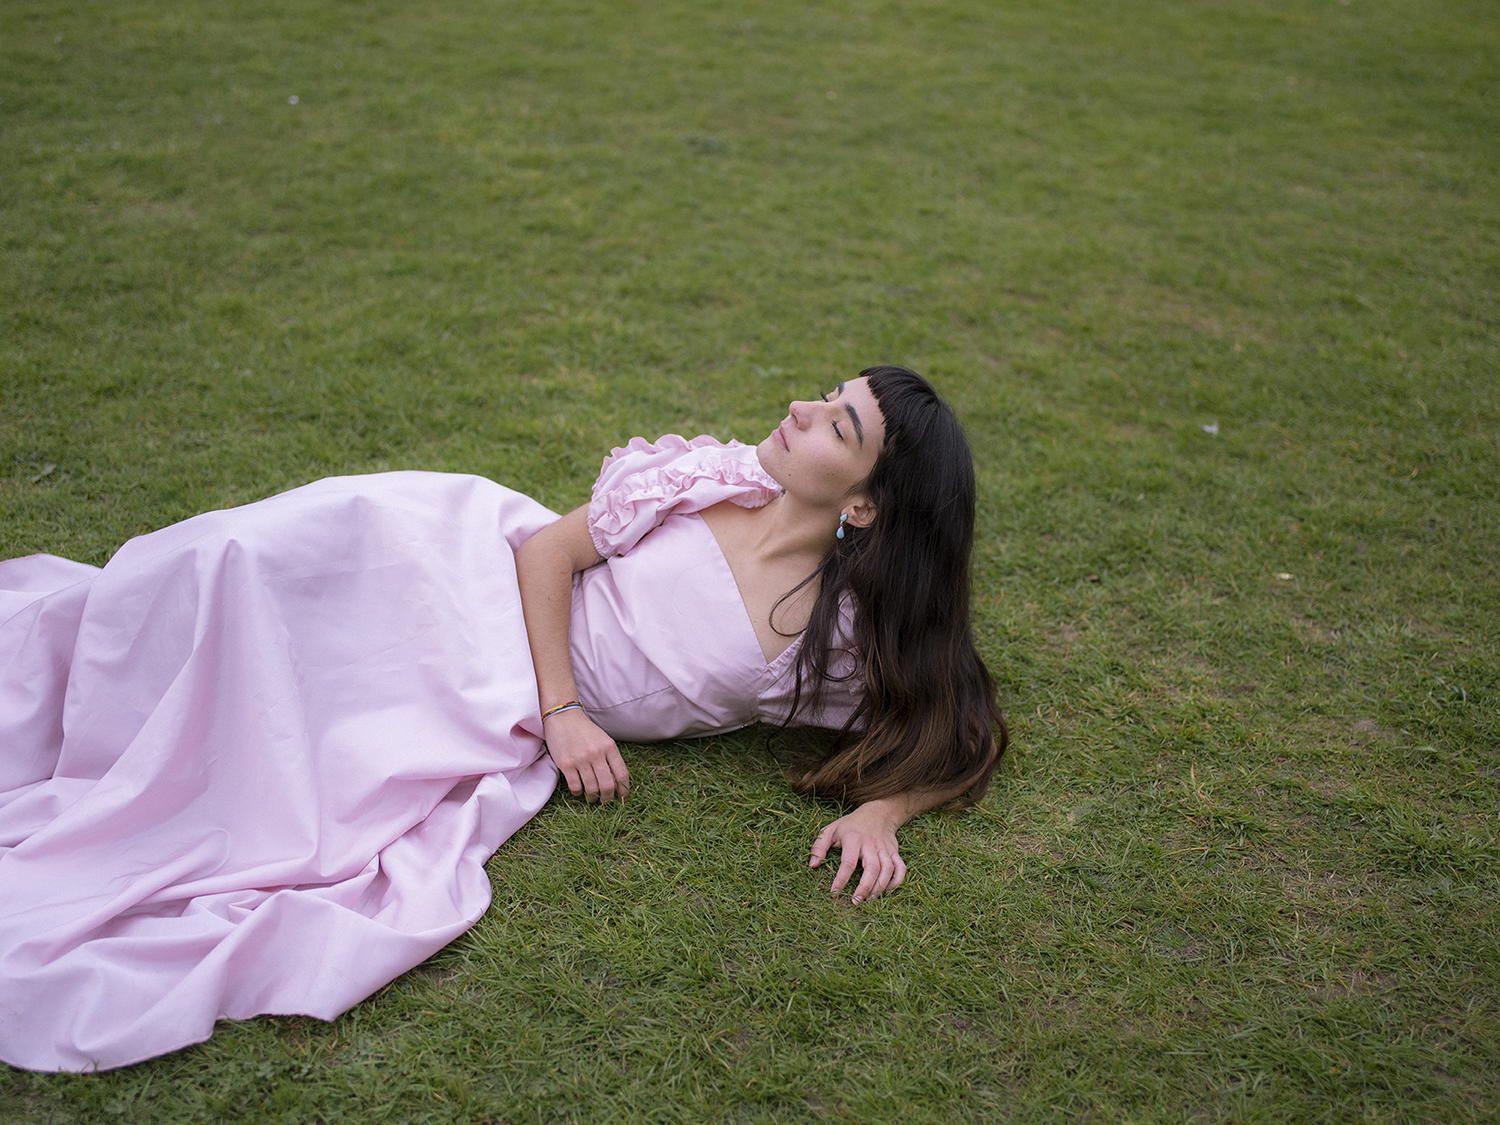 BA Photography work by Nicola Faye Bates showing a girl in a pink dress lying in a big grass field.